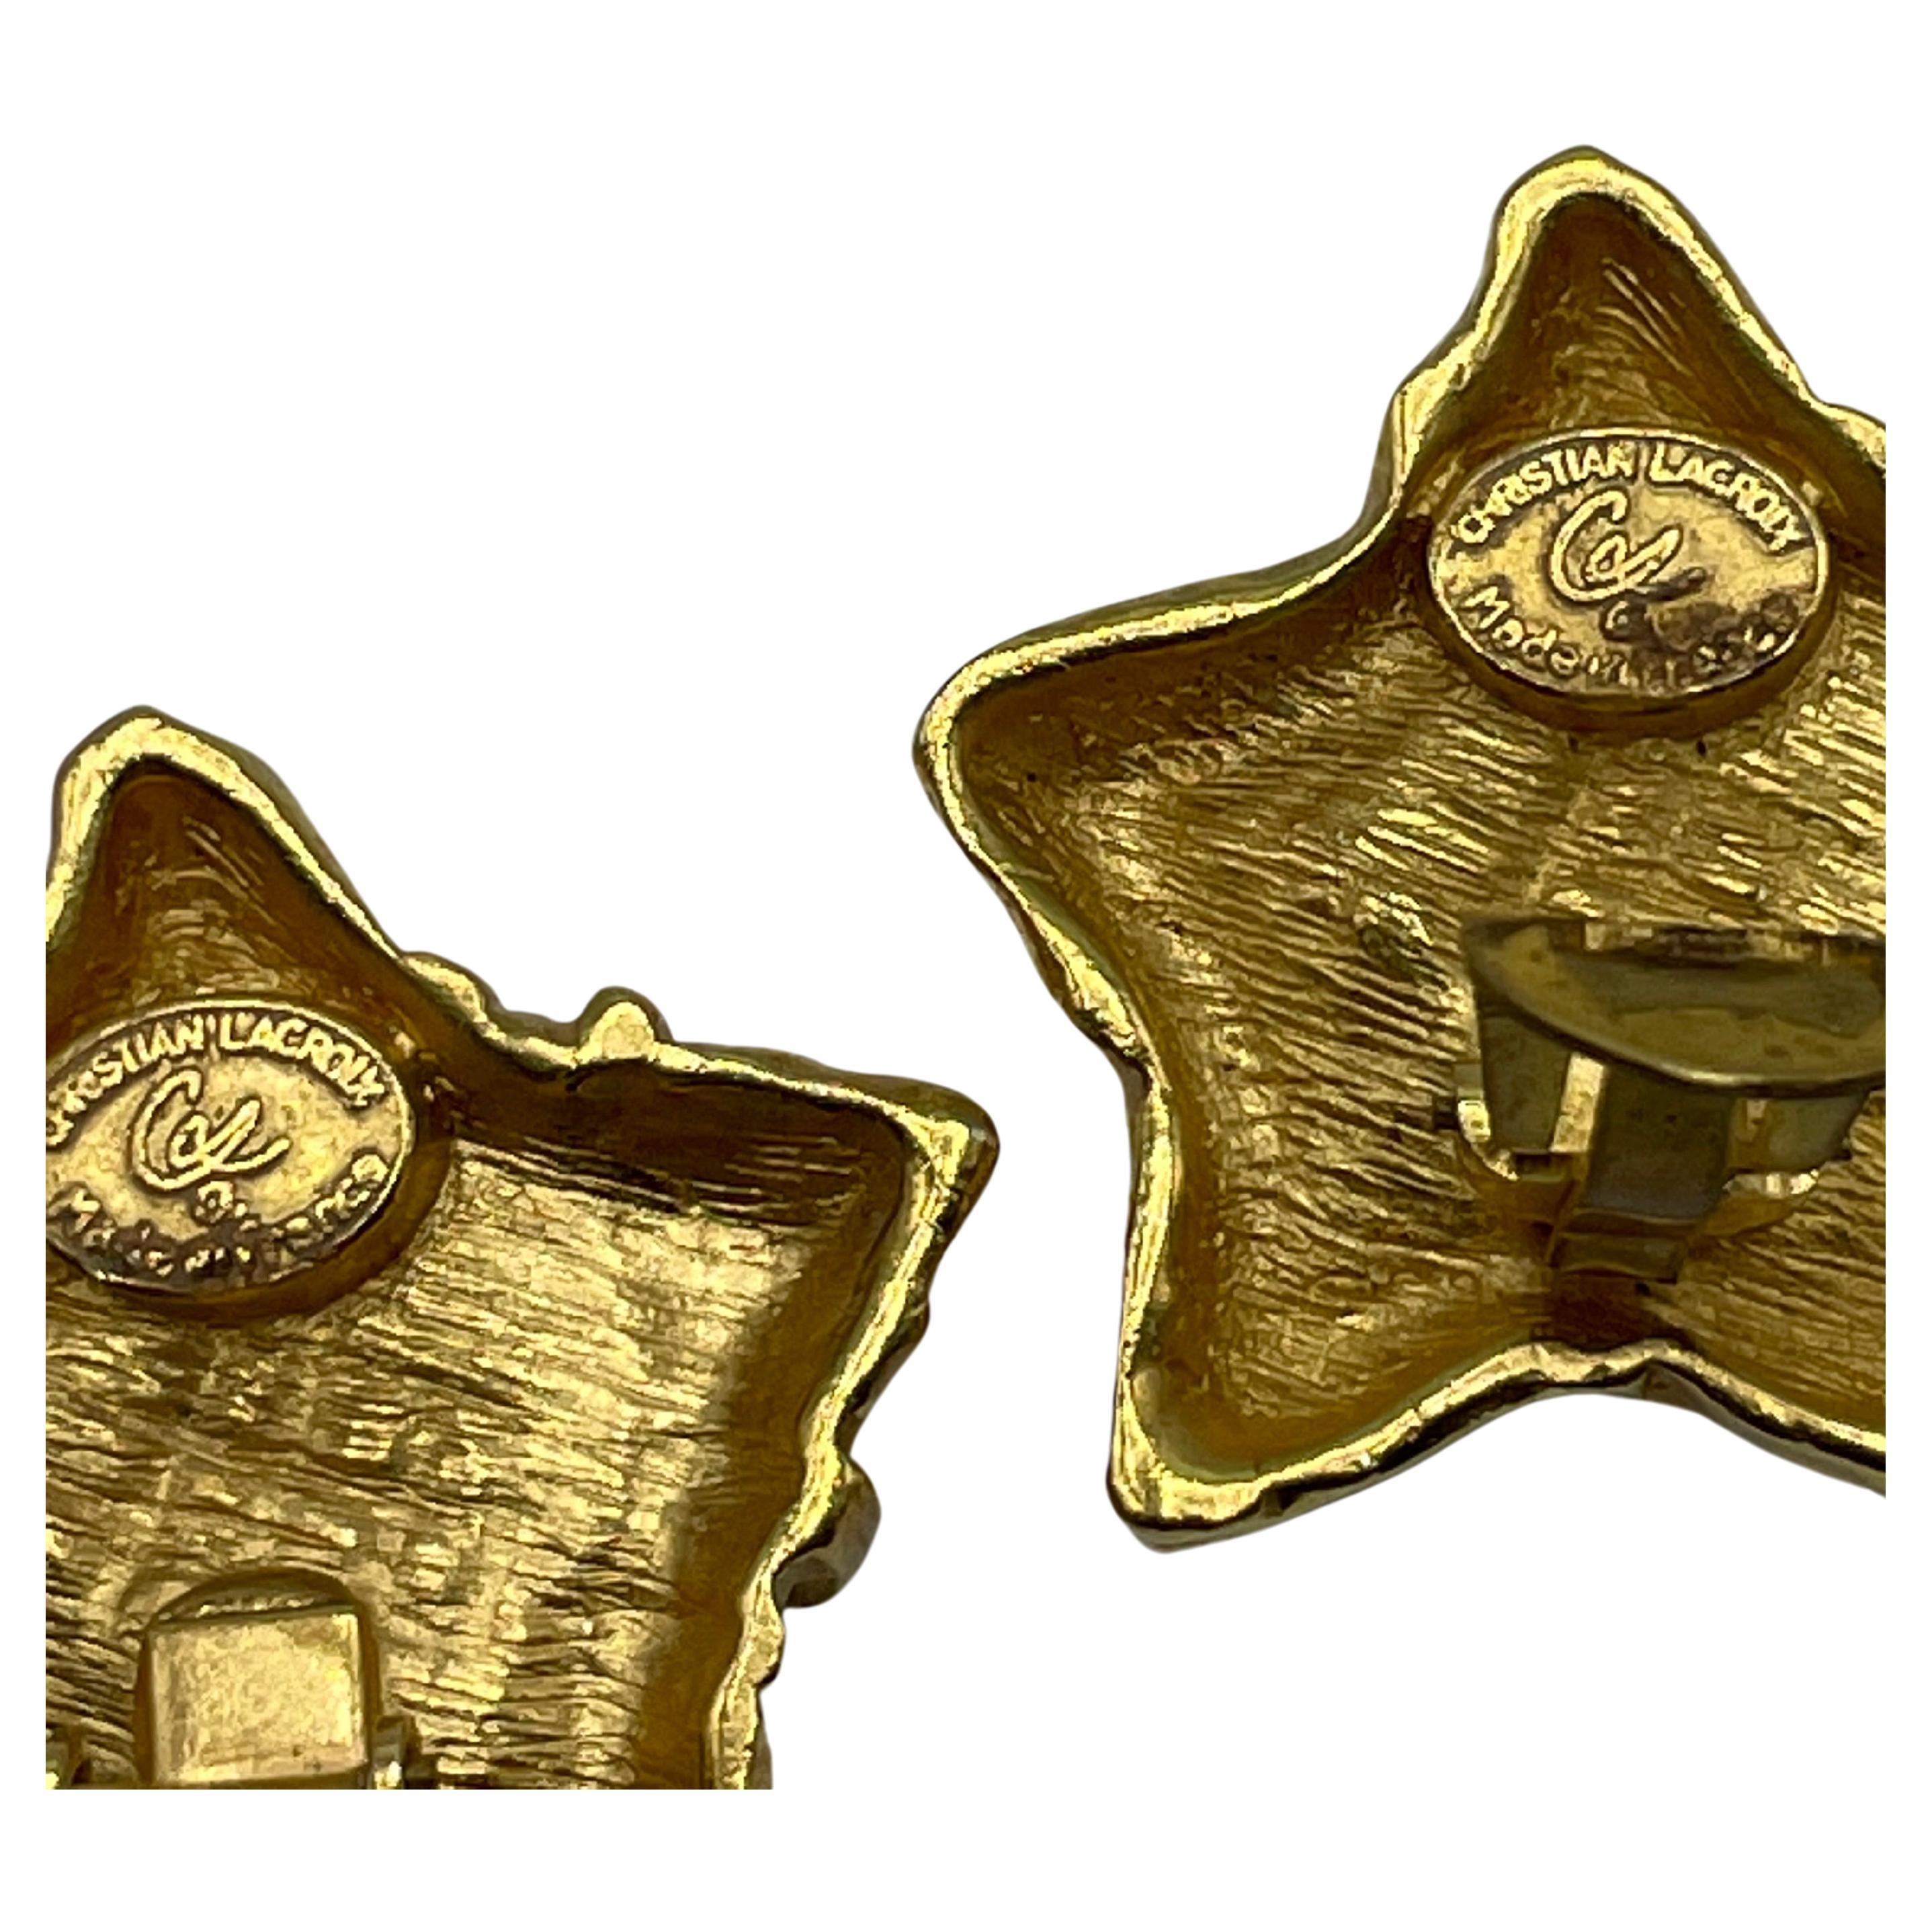 Christian Lacroix  vintage clip on earring gold plated. Sign Christian  Lacroix. Made in France. In perfect condition and quality. 